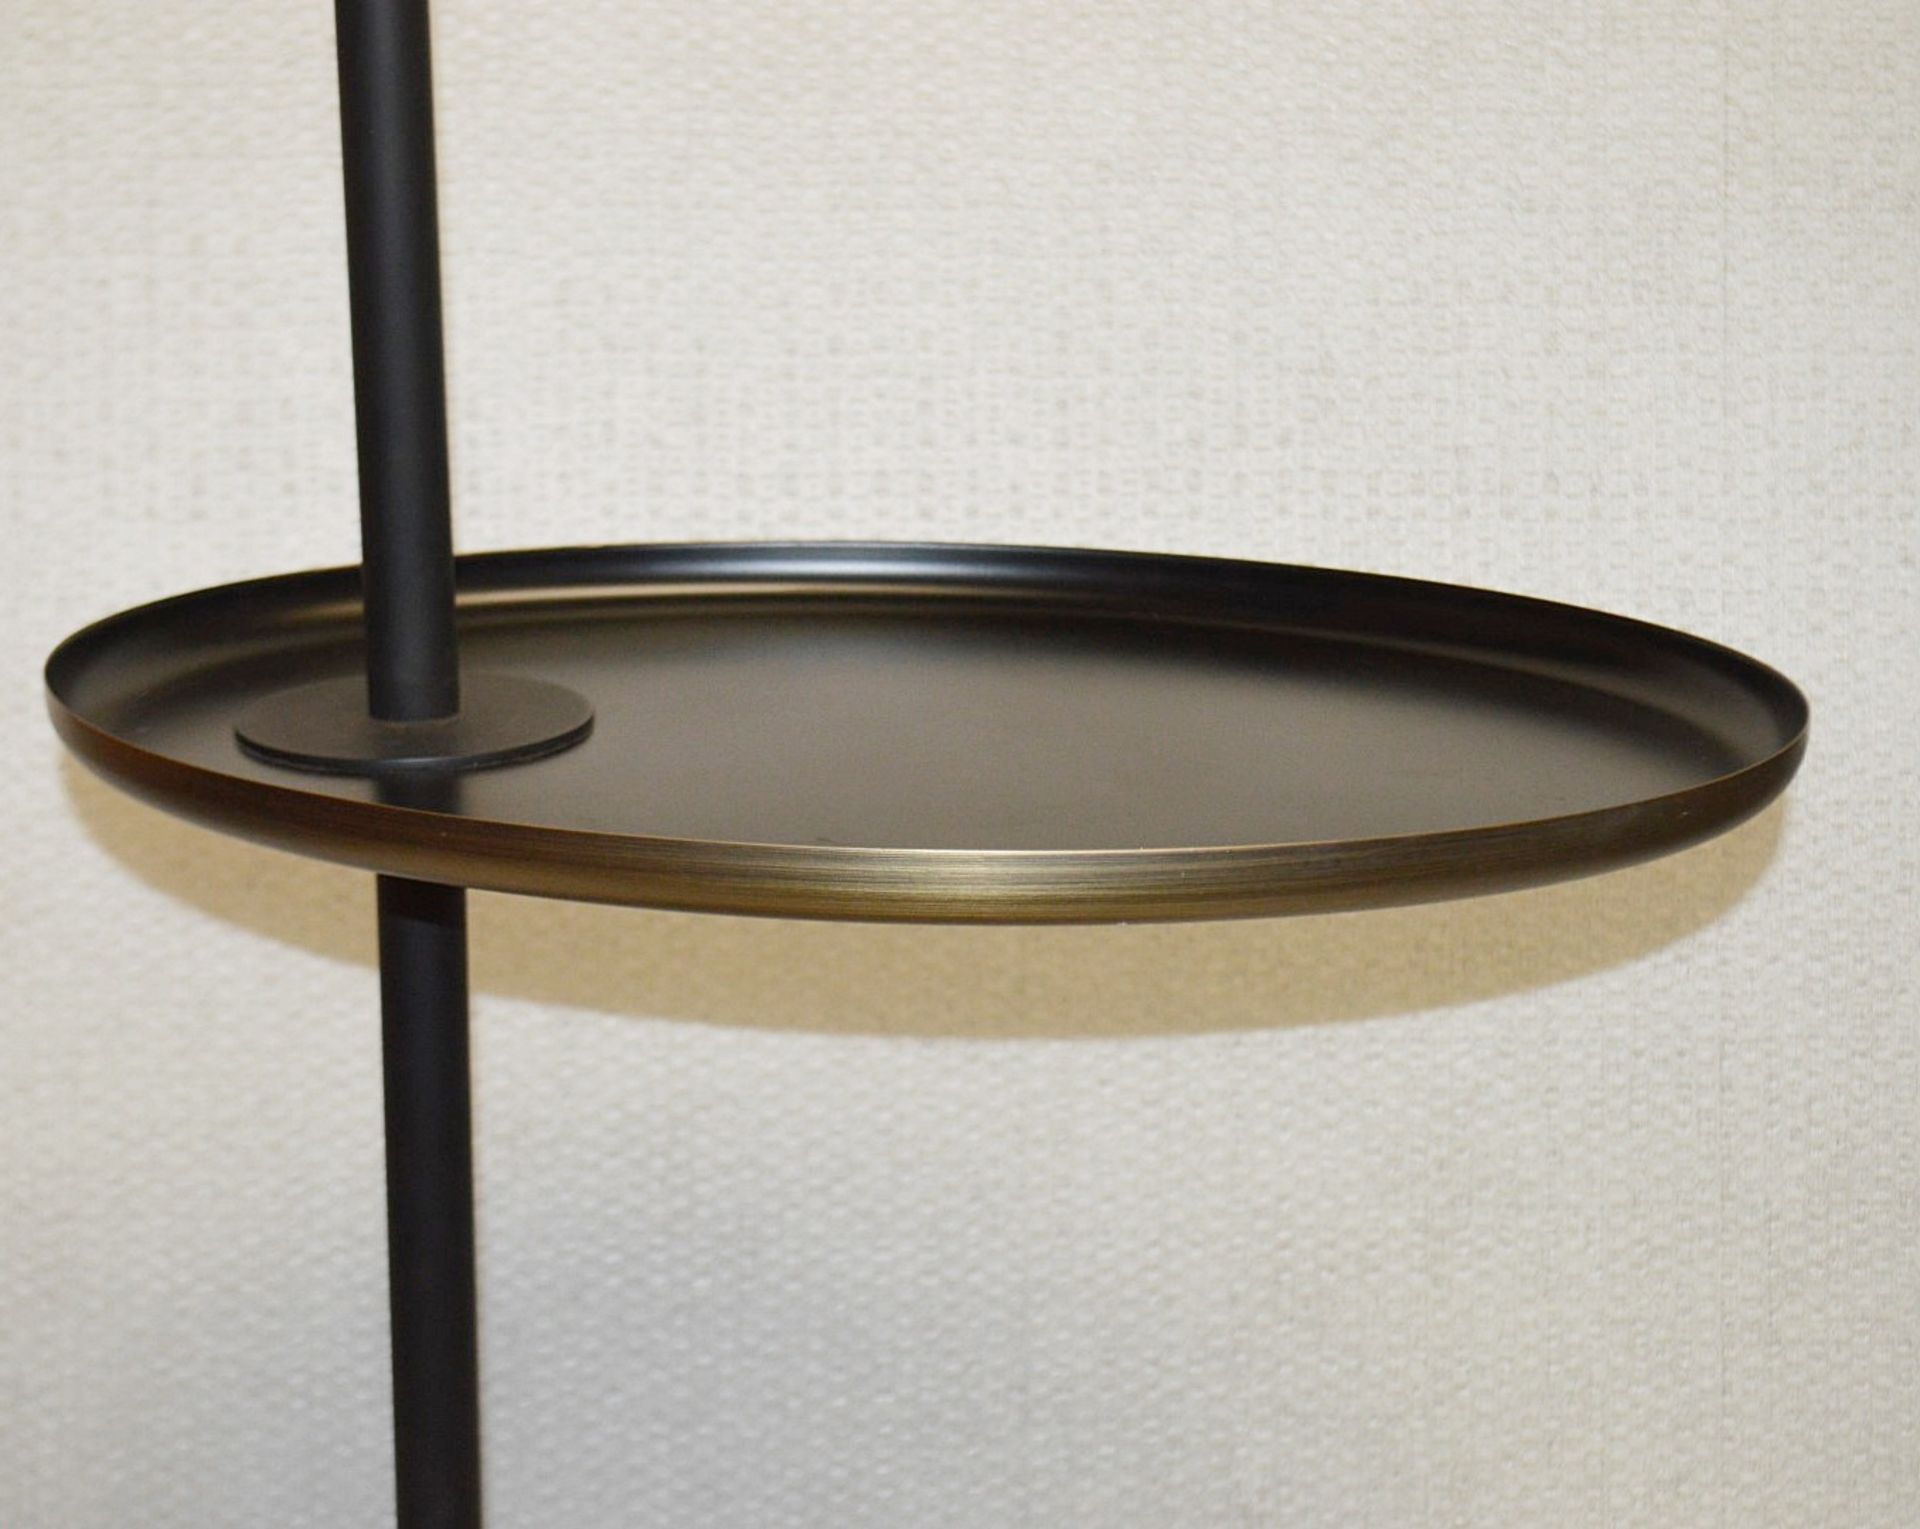 1 x CHELSOM Freestanding Floor Lamp With Oval Table, In A Brass And Black Finish - Image 2 of 8